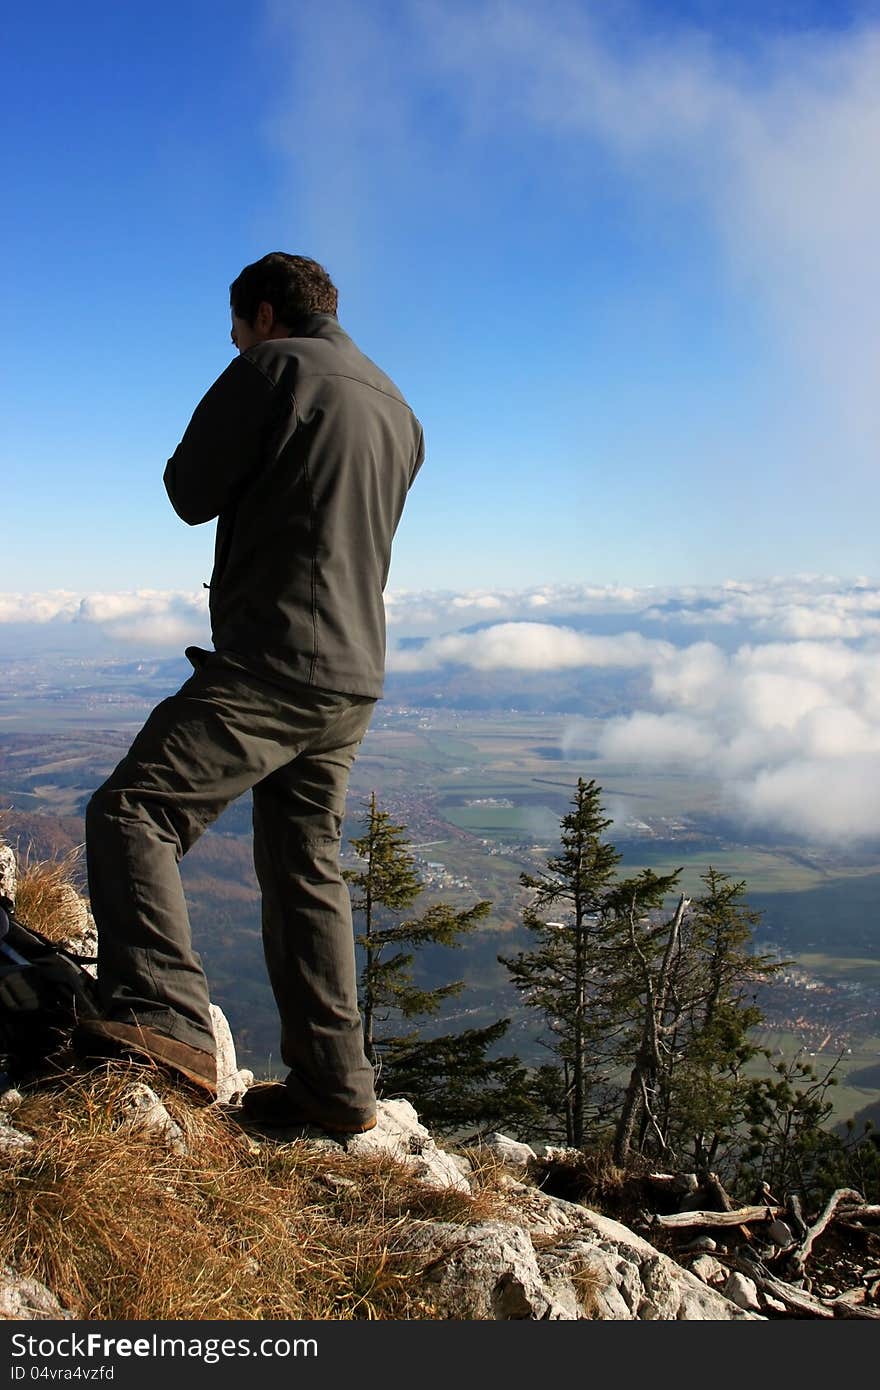 This image presents a young man admiring the view from the top of the mountain in Piatra Craiului, Romania .